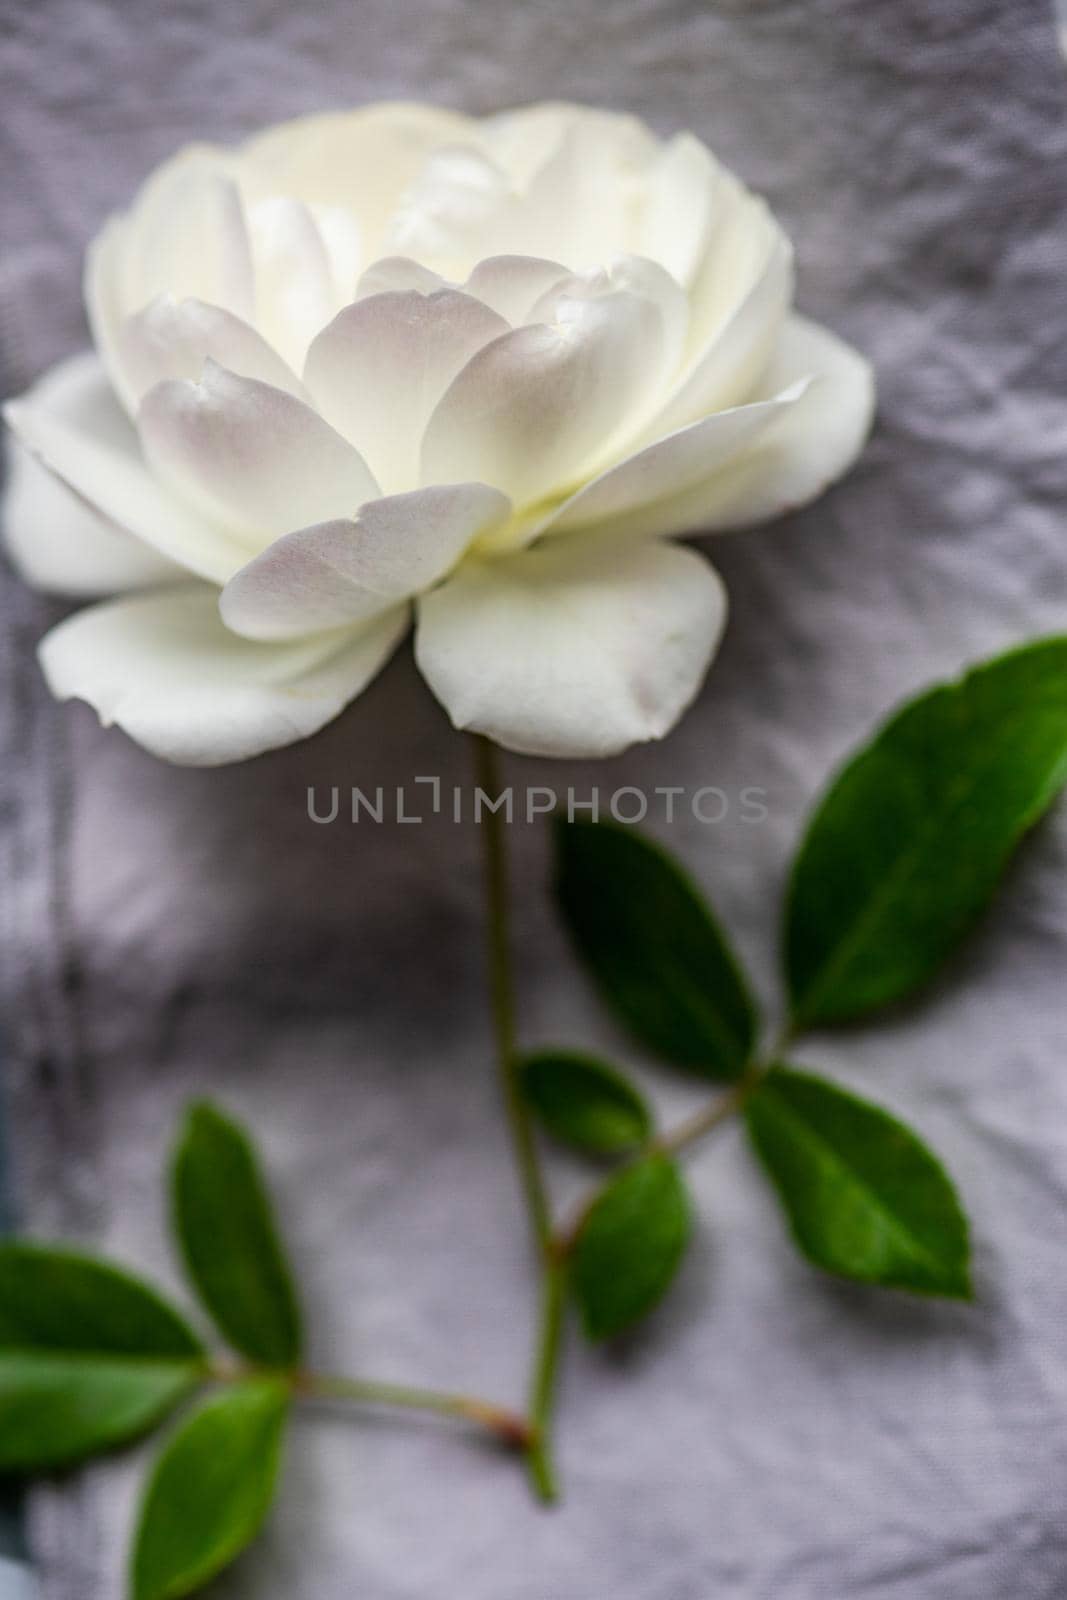 Blooming white rose flowers by Elet